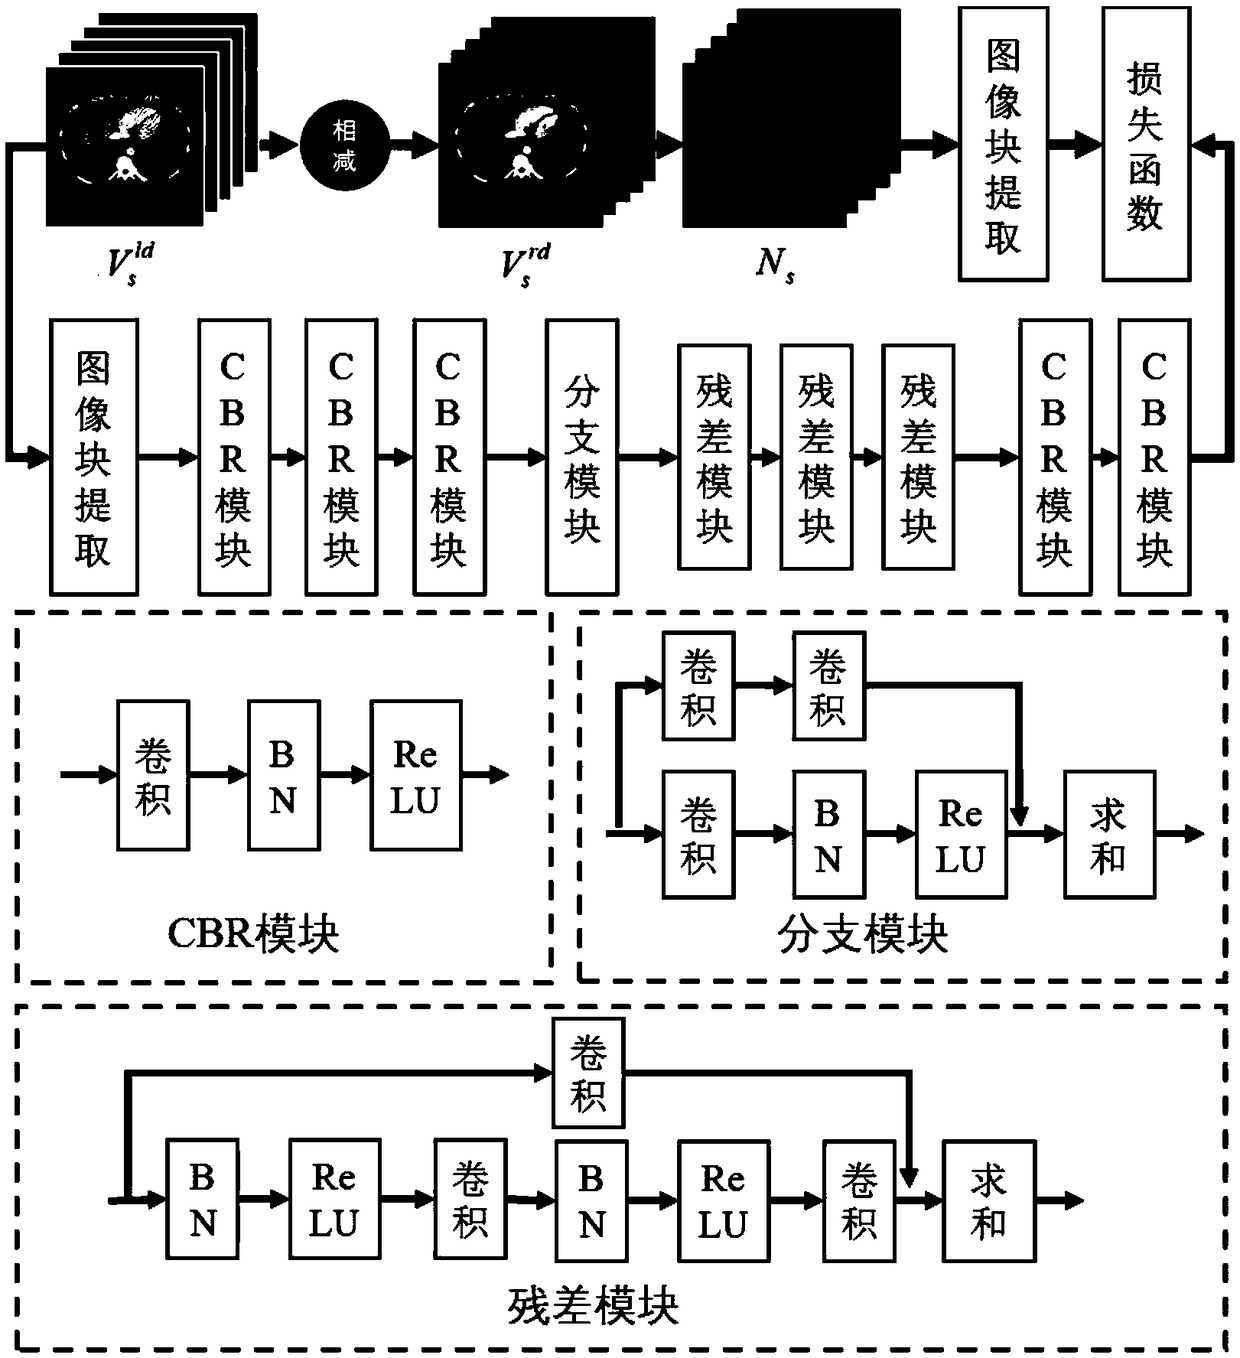 A low-dose CT image processing system based on noise artifact suppression convolutional neural network